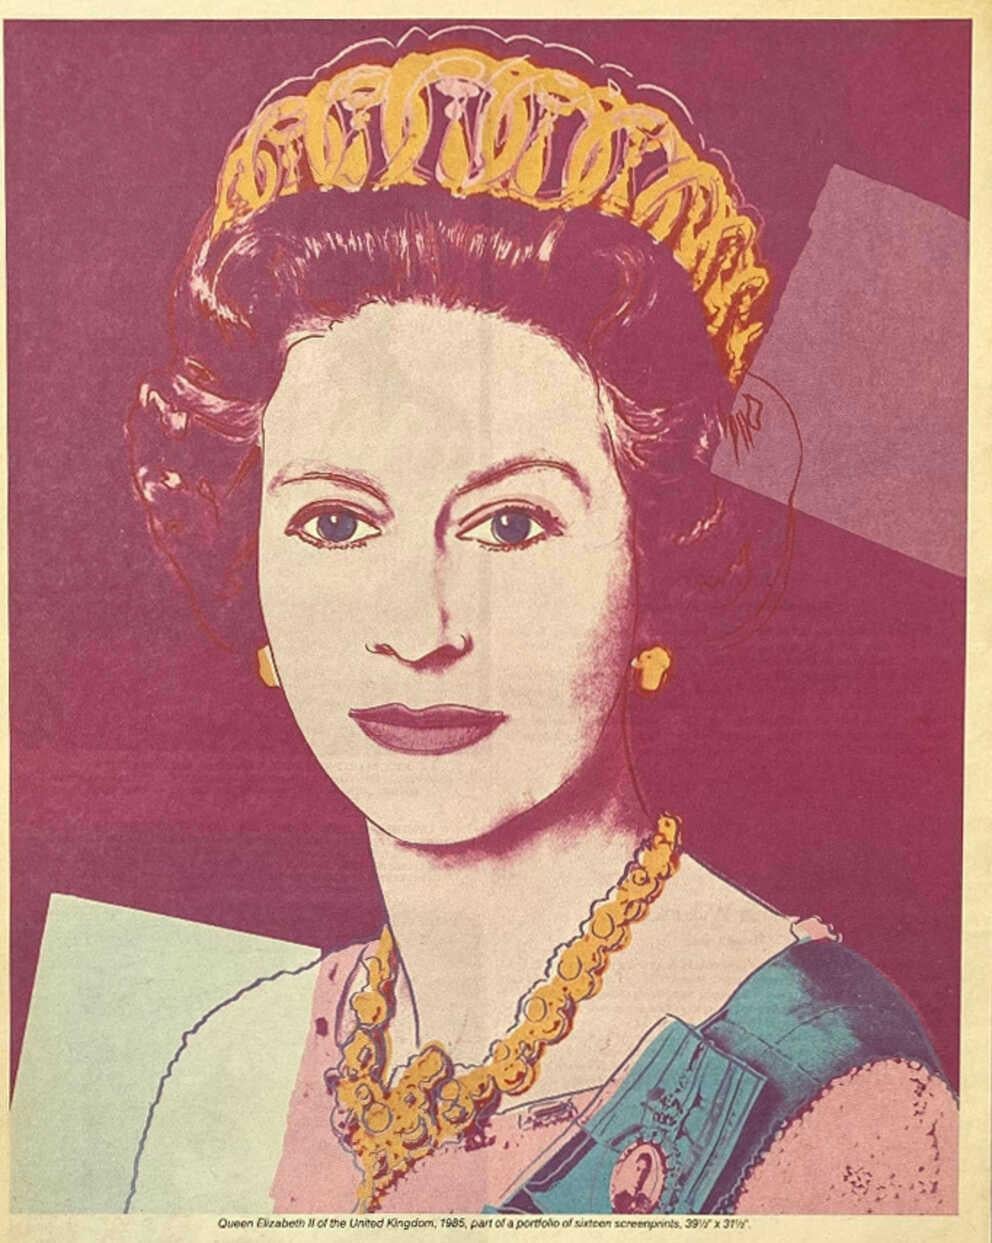 Andy Warhol Queens advertisement circa 1985:
Vintage original poster advertisement for Andy Warhol Reigning Queens at Leo Castelli gallery. 

Offset printed on newspaper stock. Measures: 11 x 17 inches. 
Very good overall vintage condition.